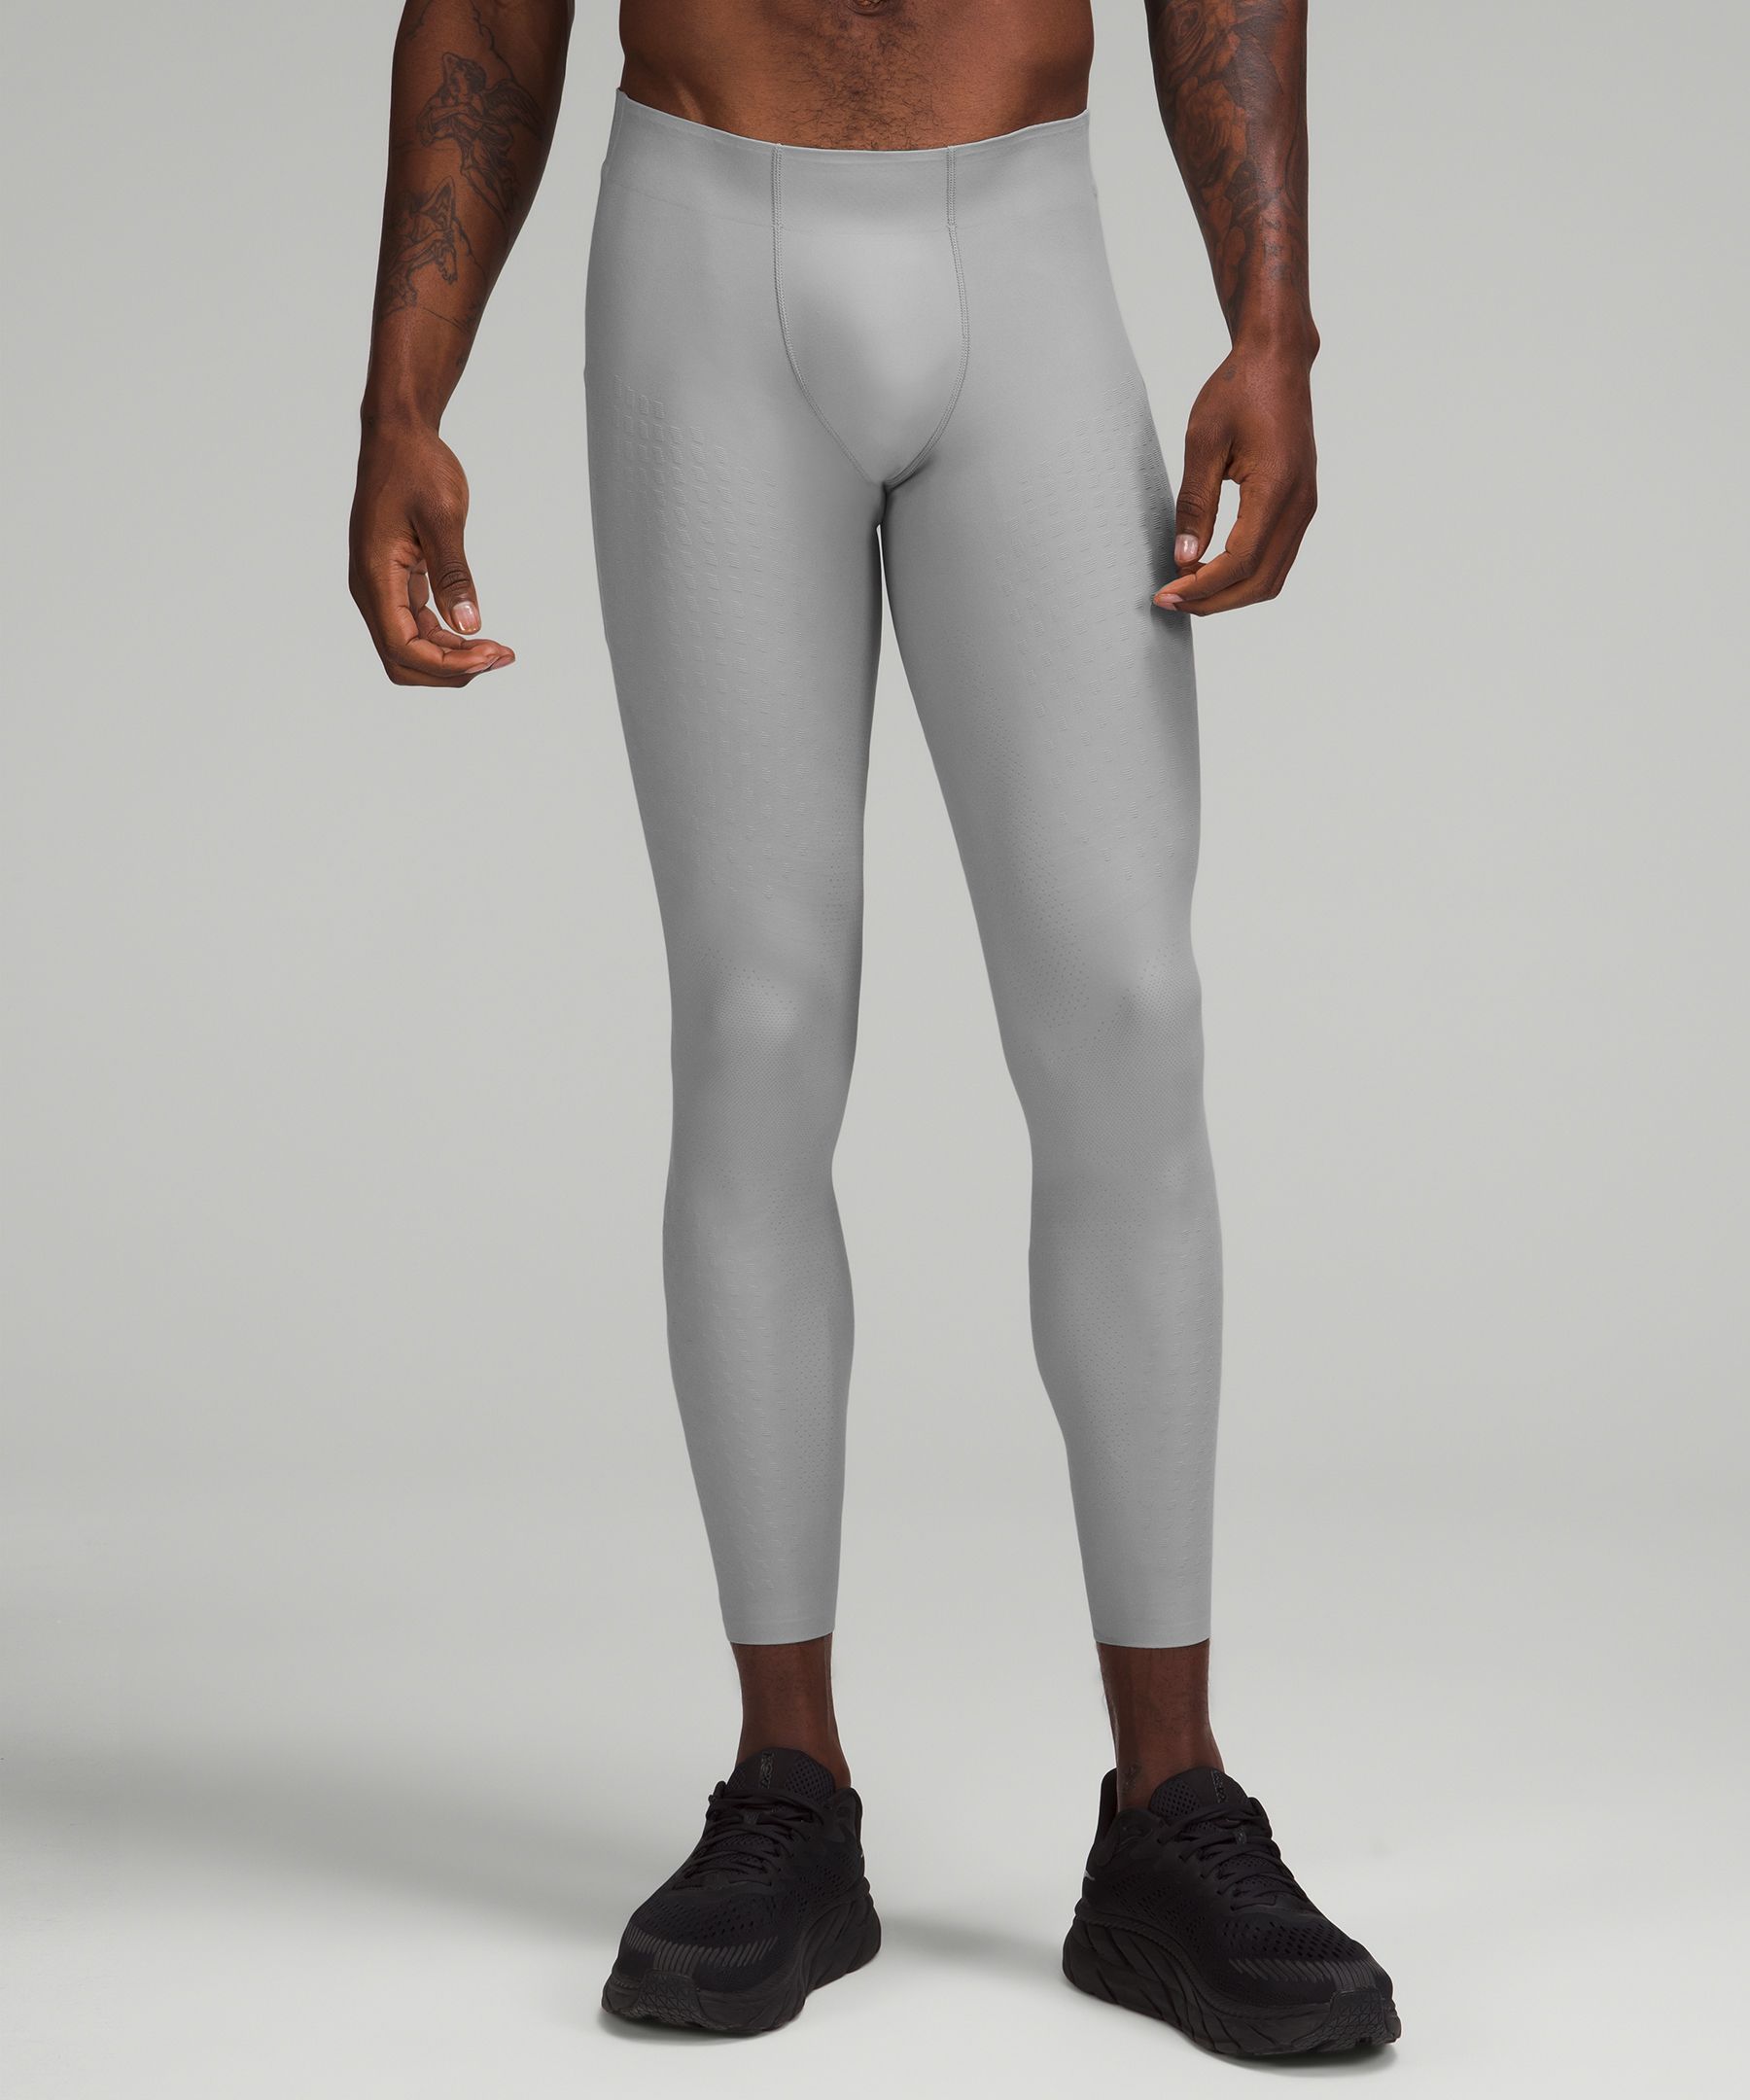 Tights for Men